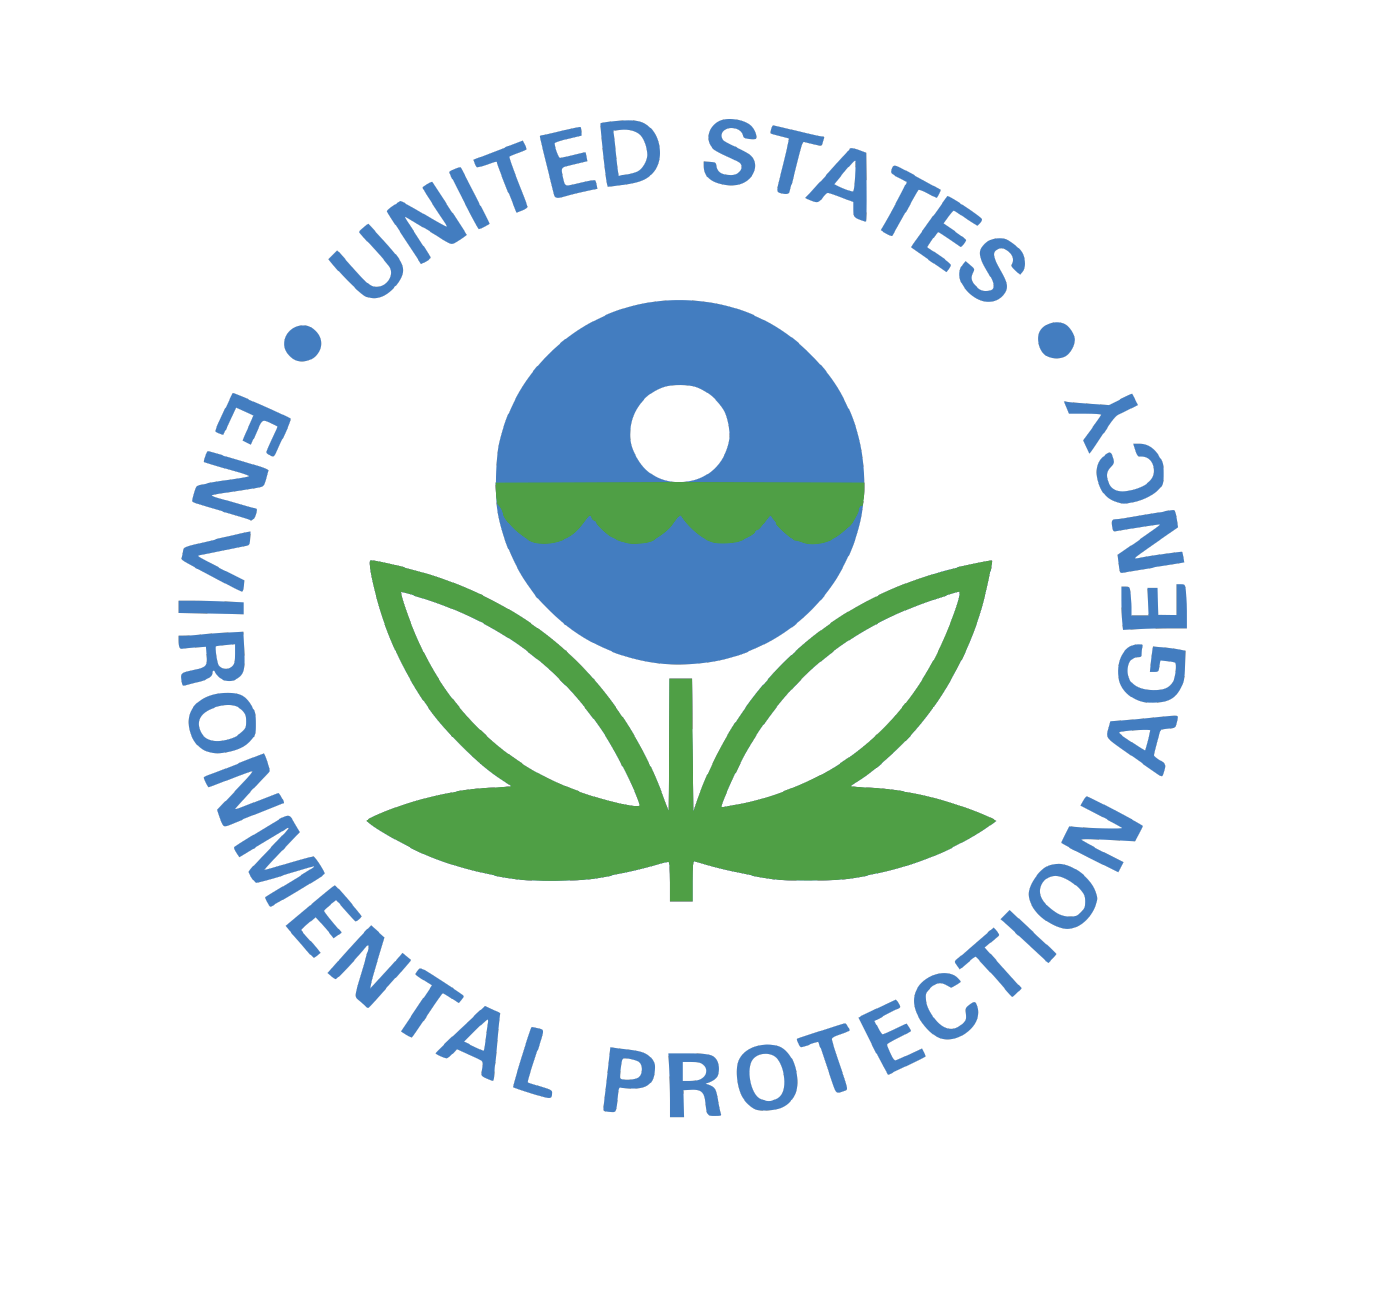 Scott Electric Recycling Division is EPA compliant